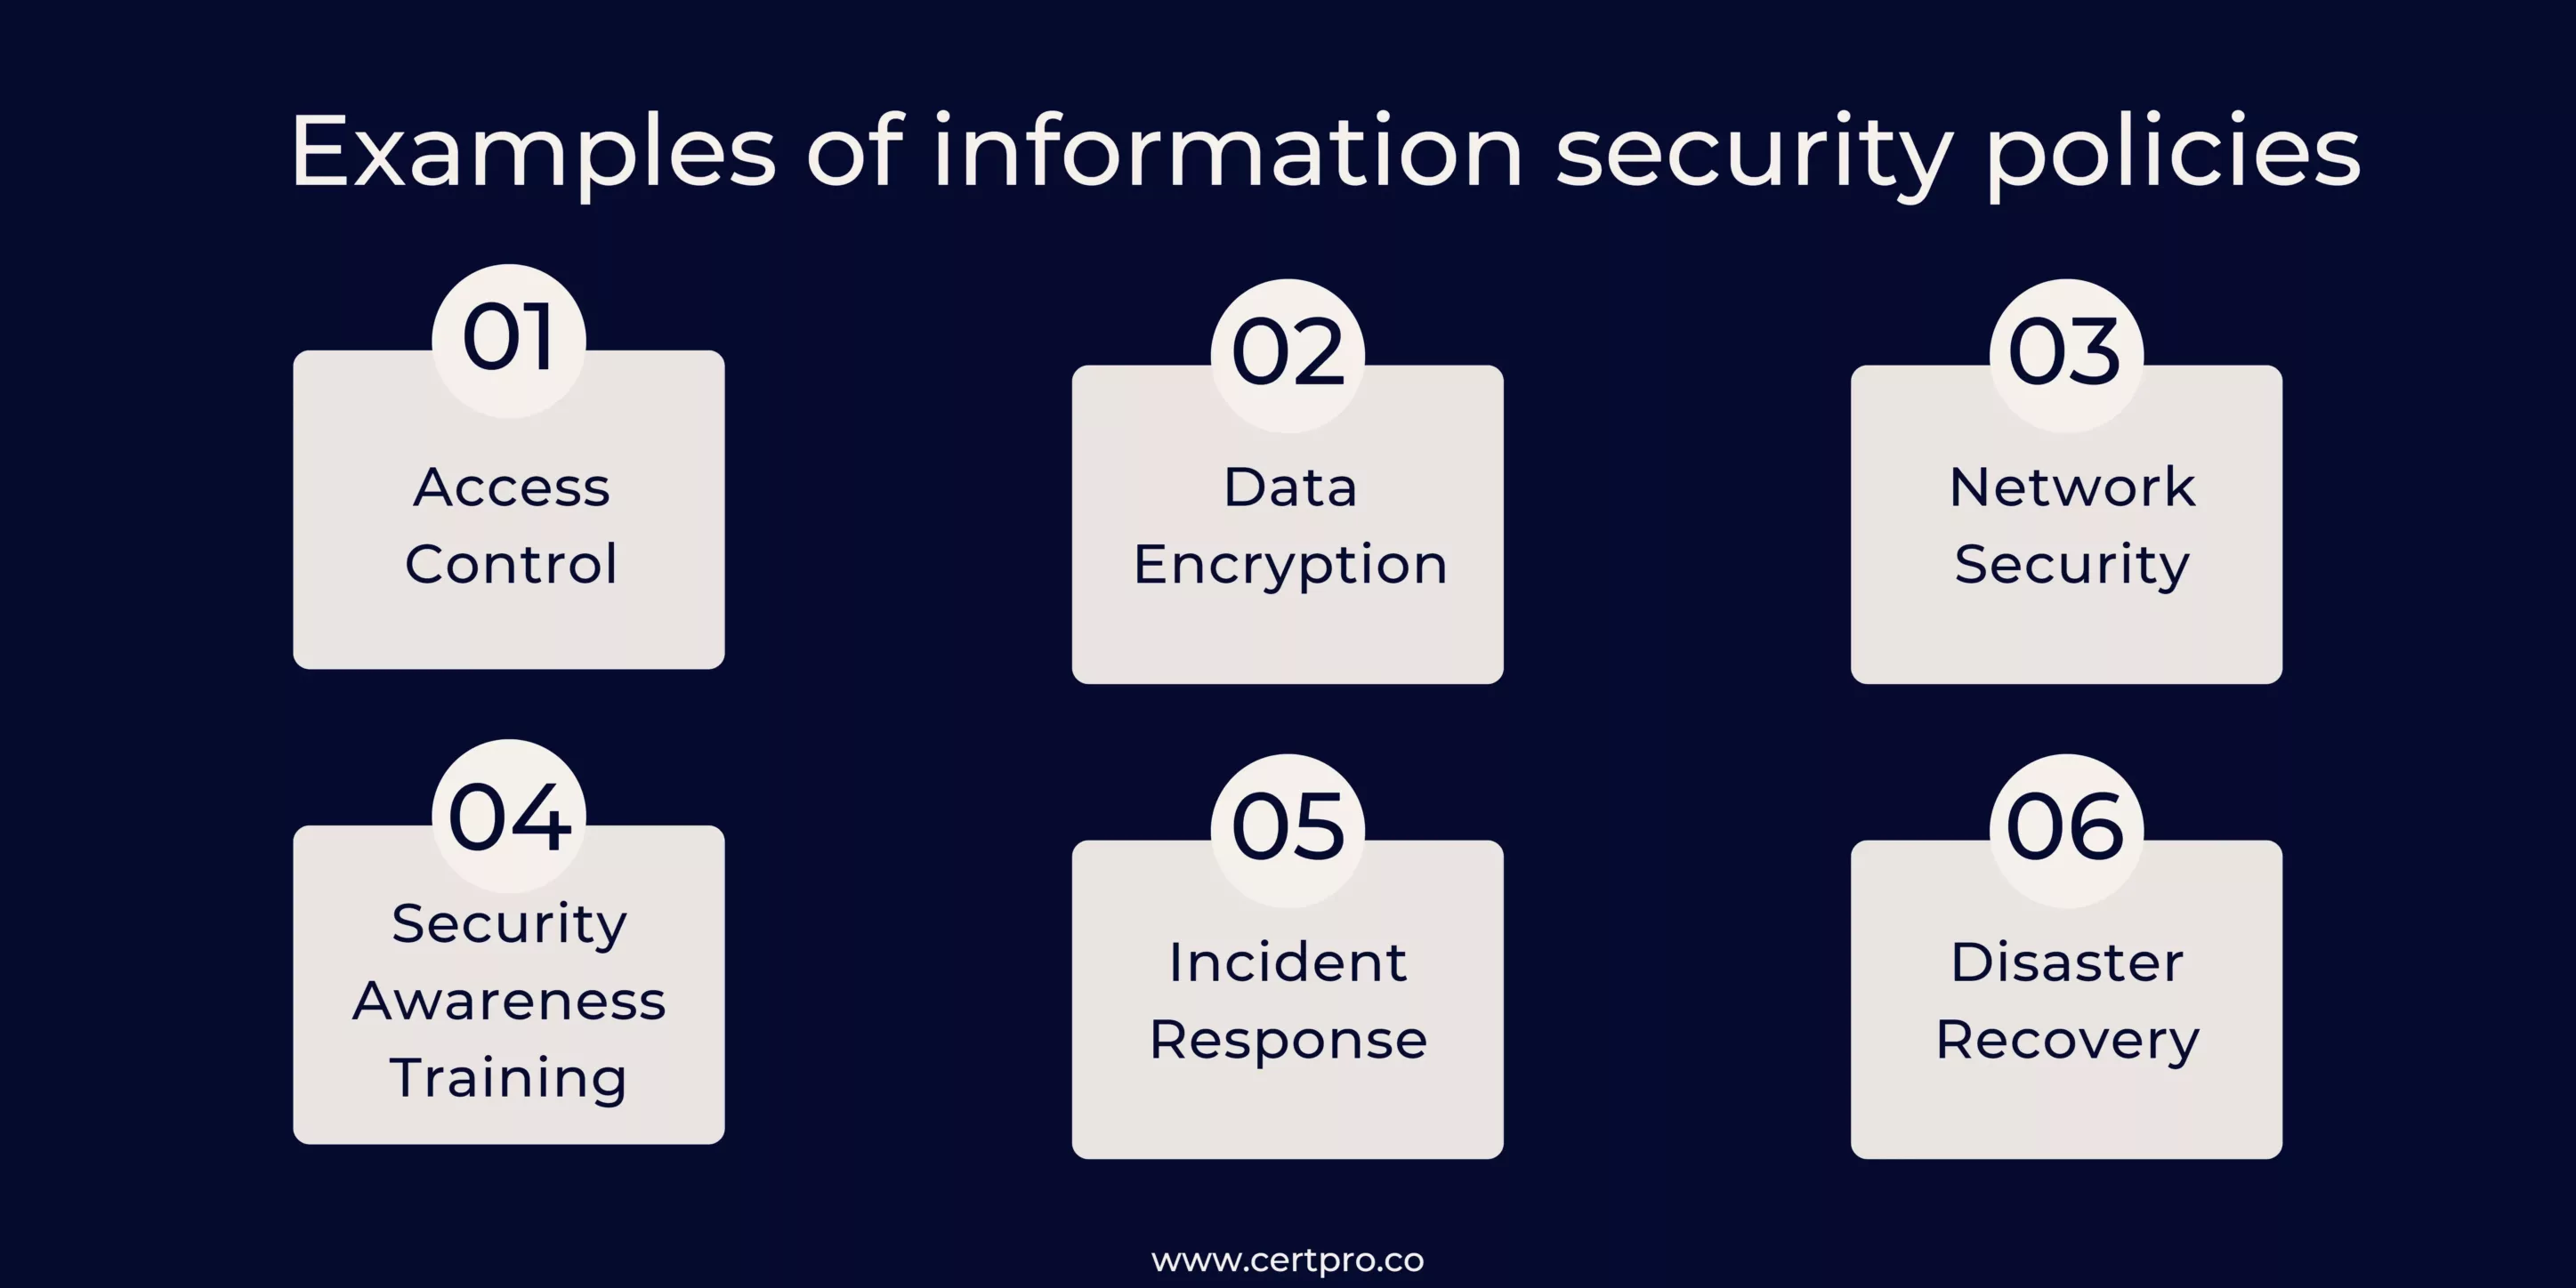 Examples of information security policies